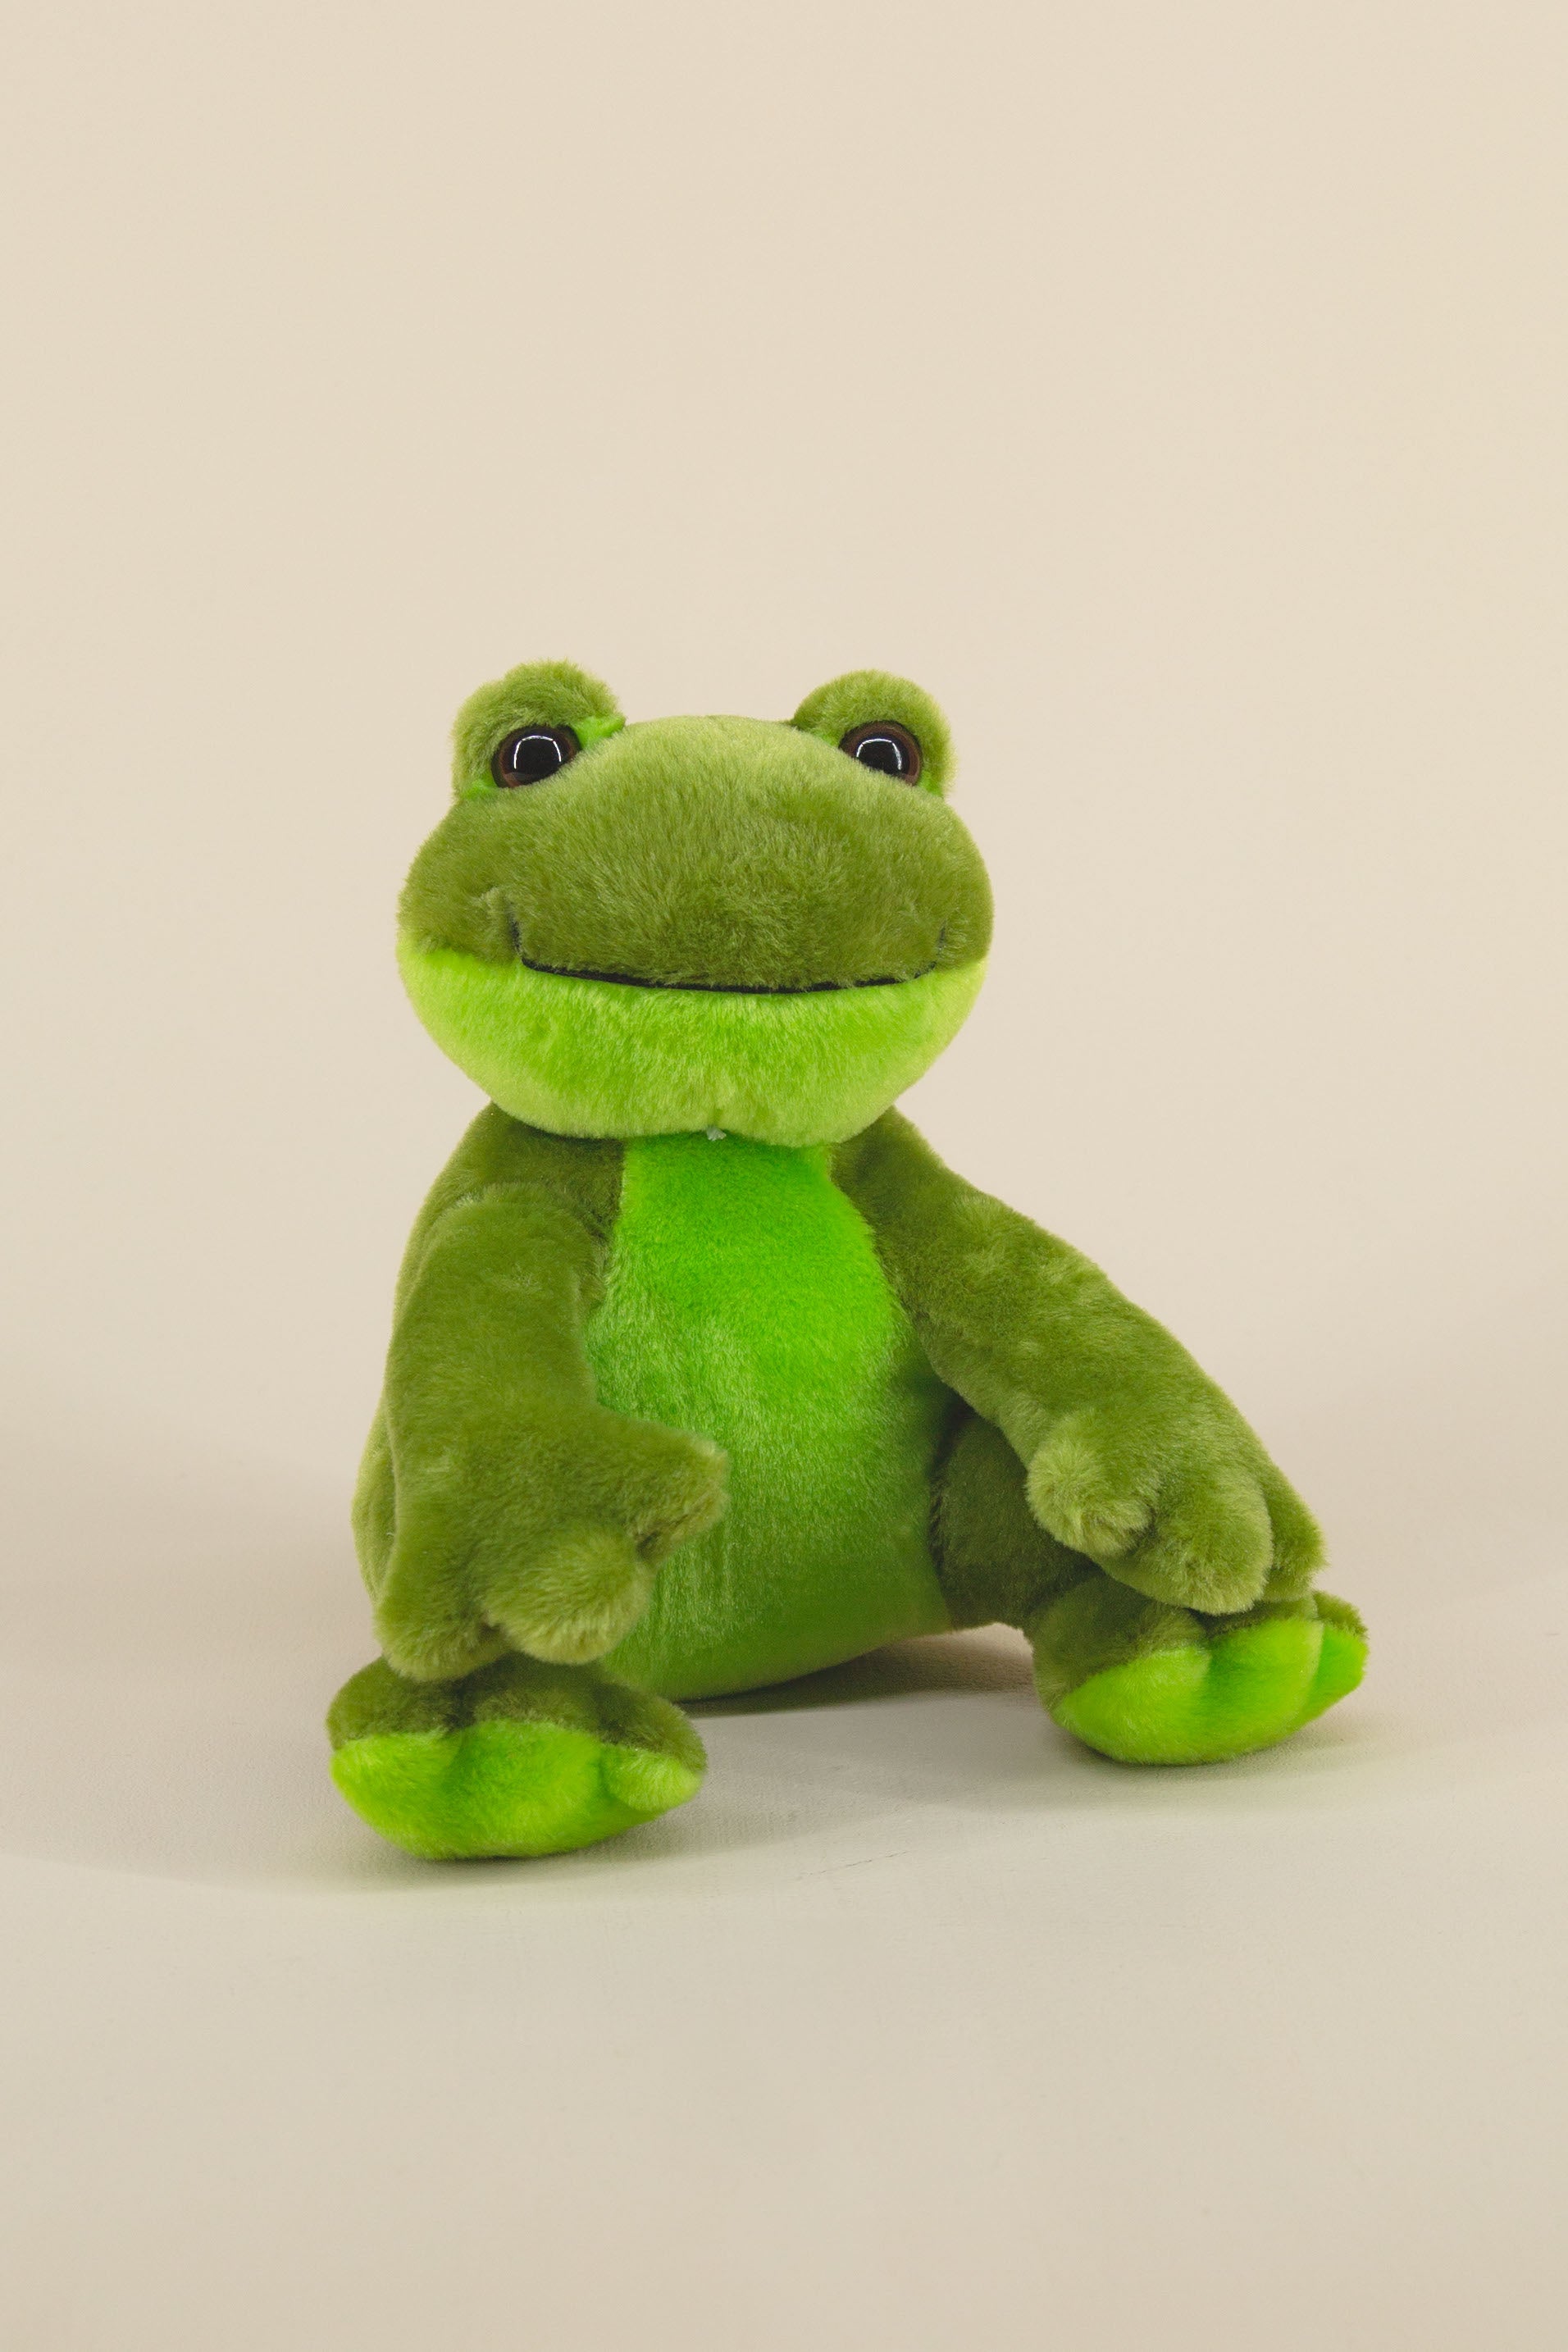 Floppy Friends Frog Stuffed Animal by First and Main at Stuffed